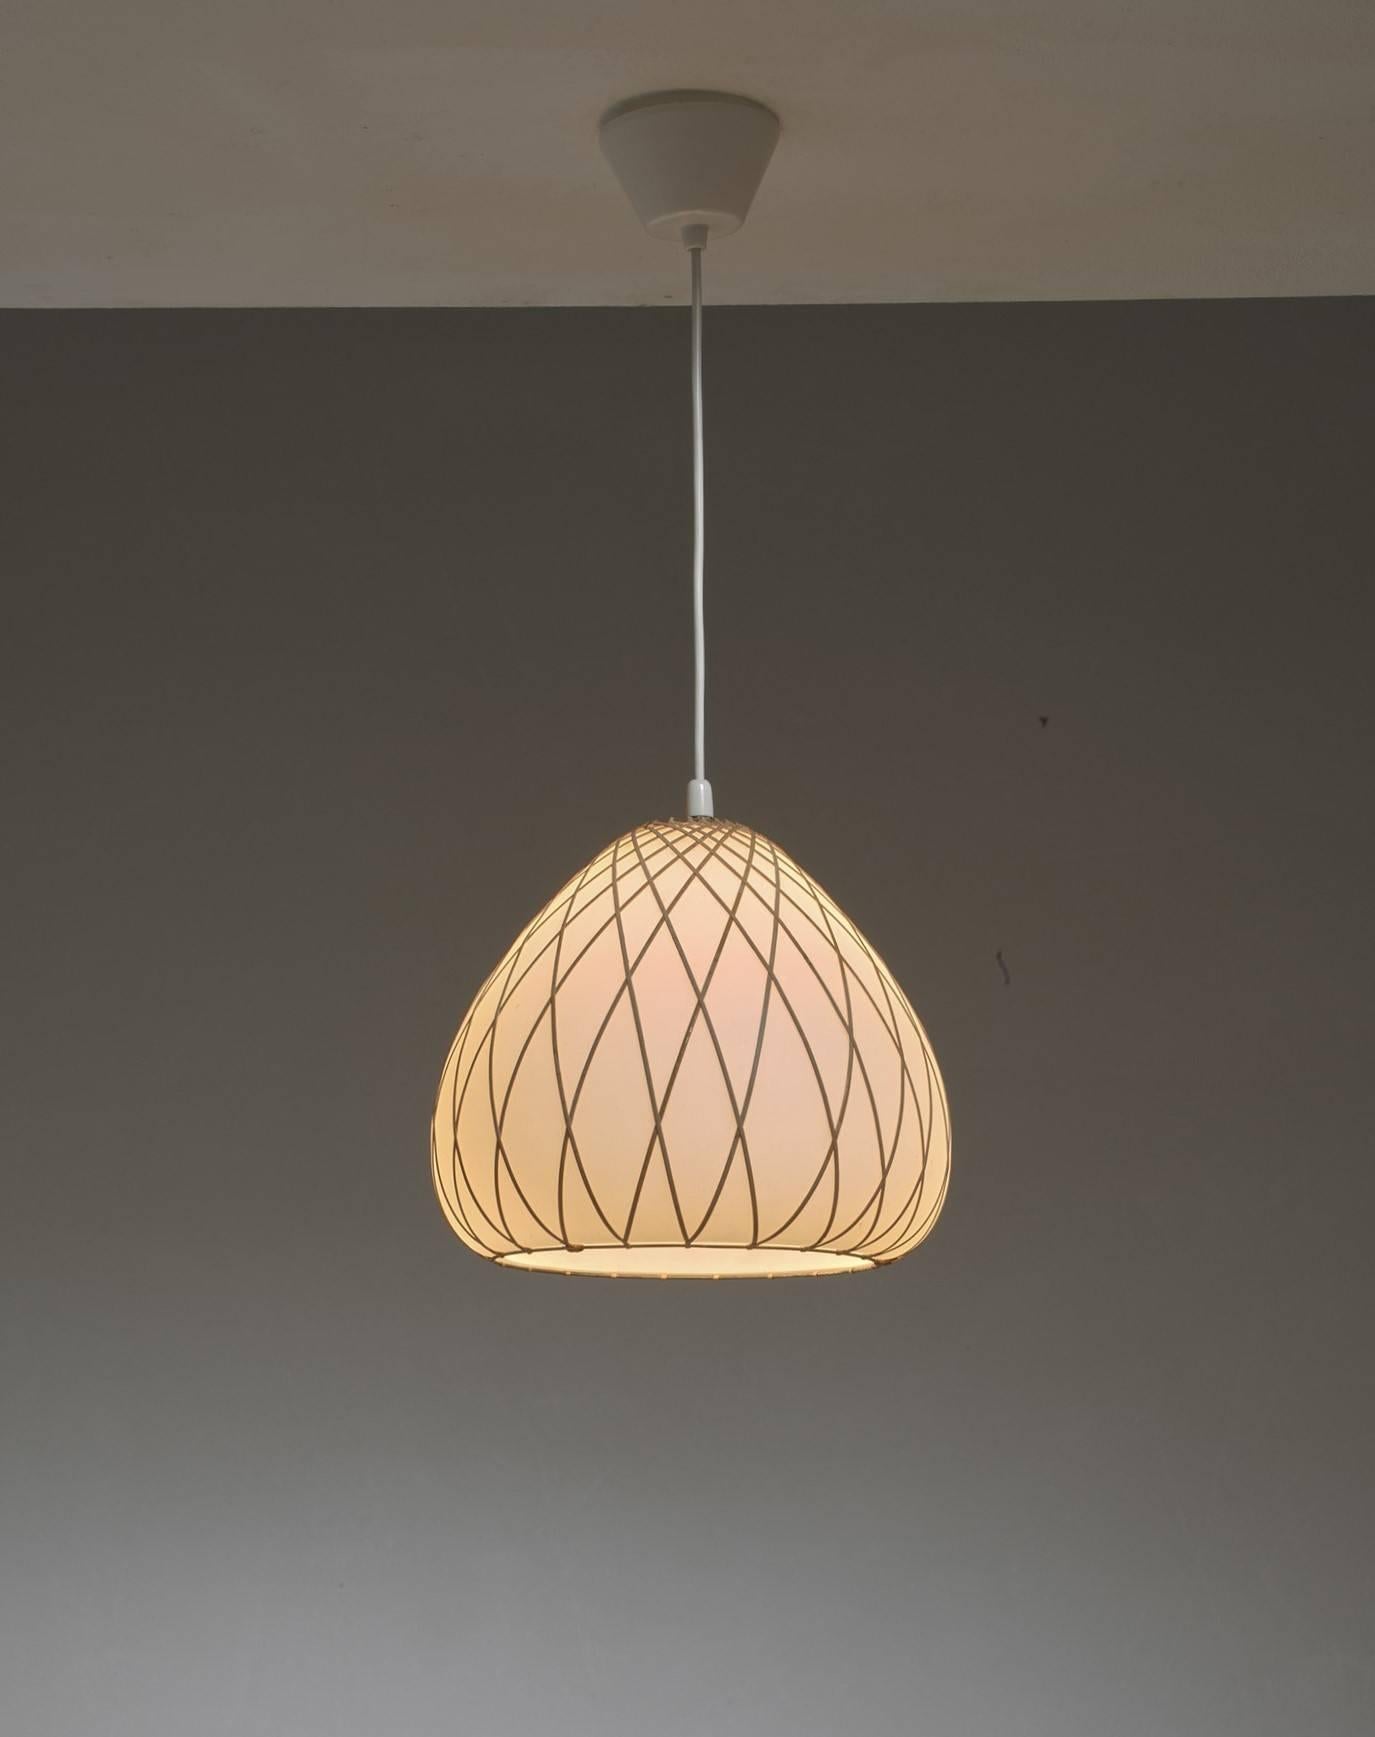 An opaline glass pendant with rattan woven around it in a geometric pattern. In style this pendant is remiscent to the work of Lisa Johansson Pape.
The combination of materials makes the lamp work great in a natural or Campagne style setting.

*